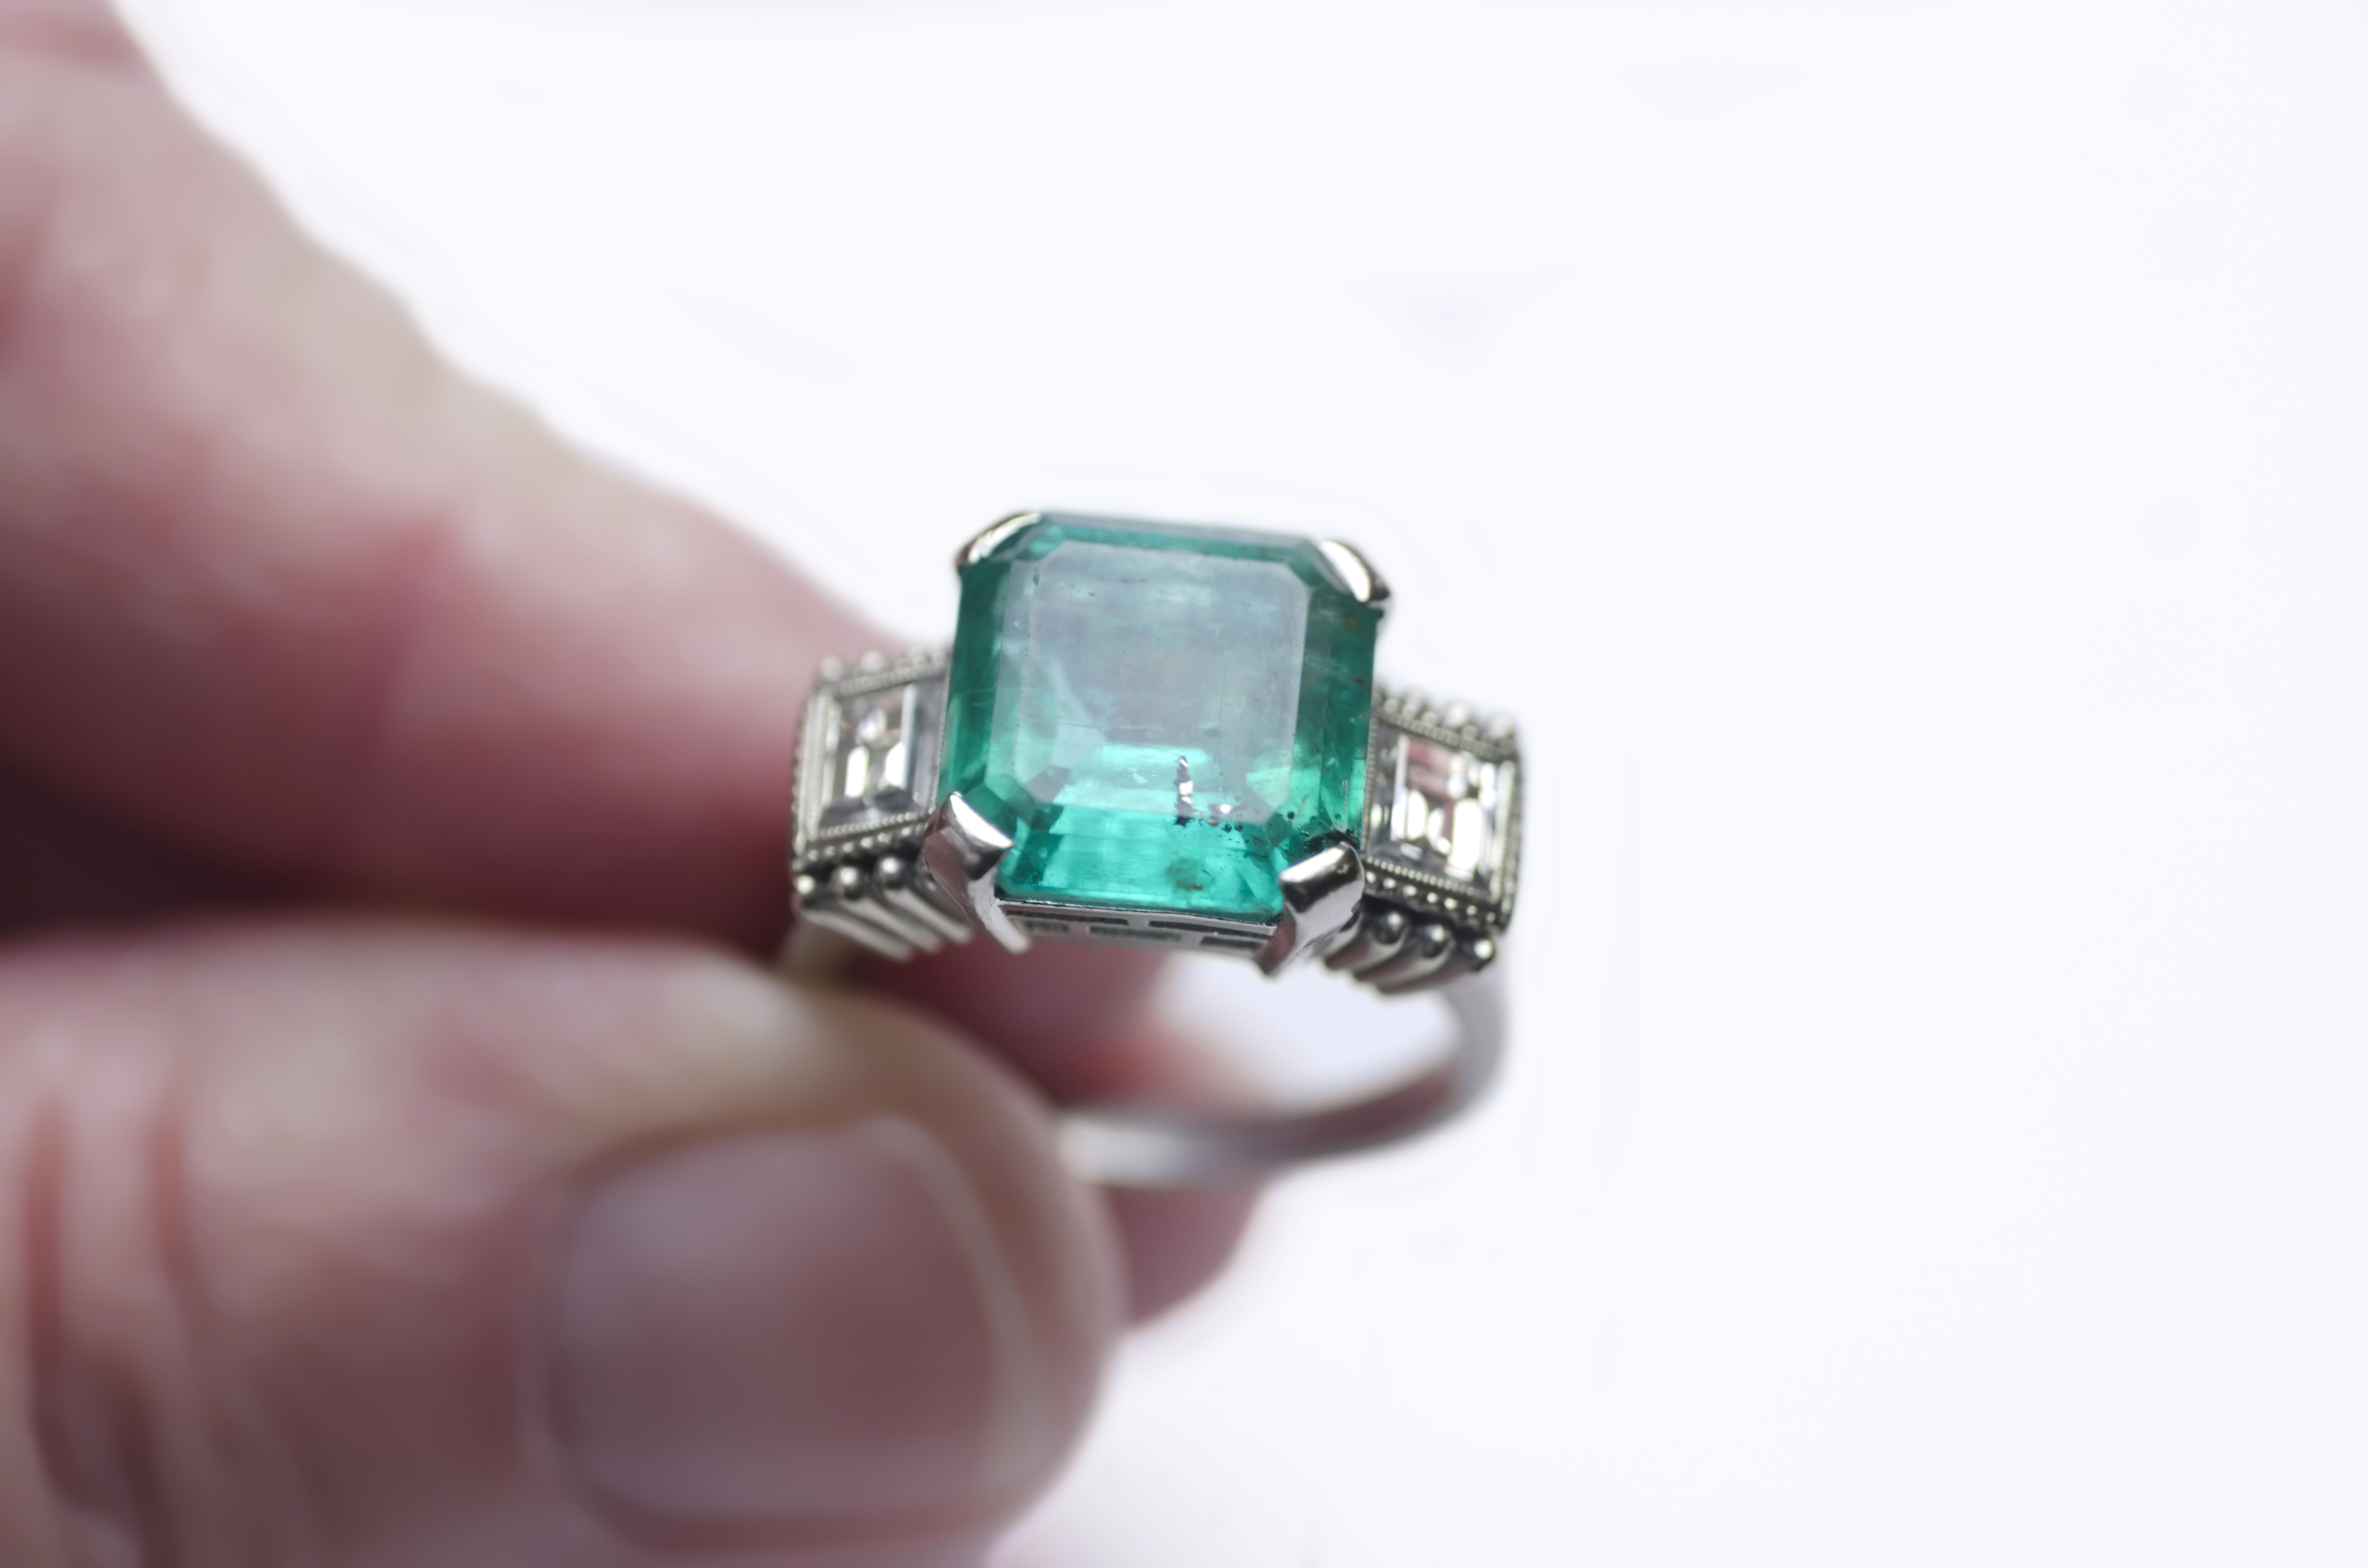 An emerald ring | Source: Getty Images